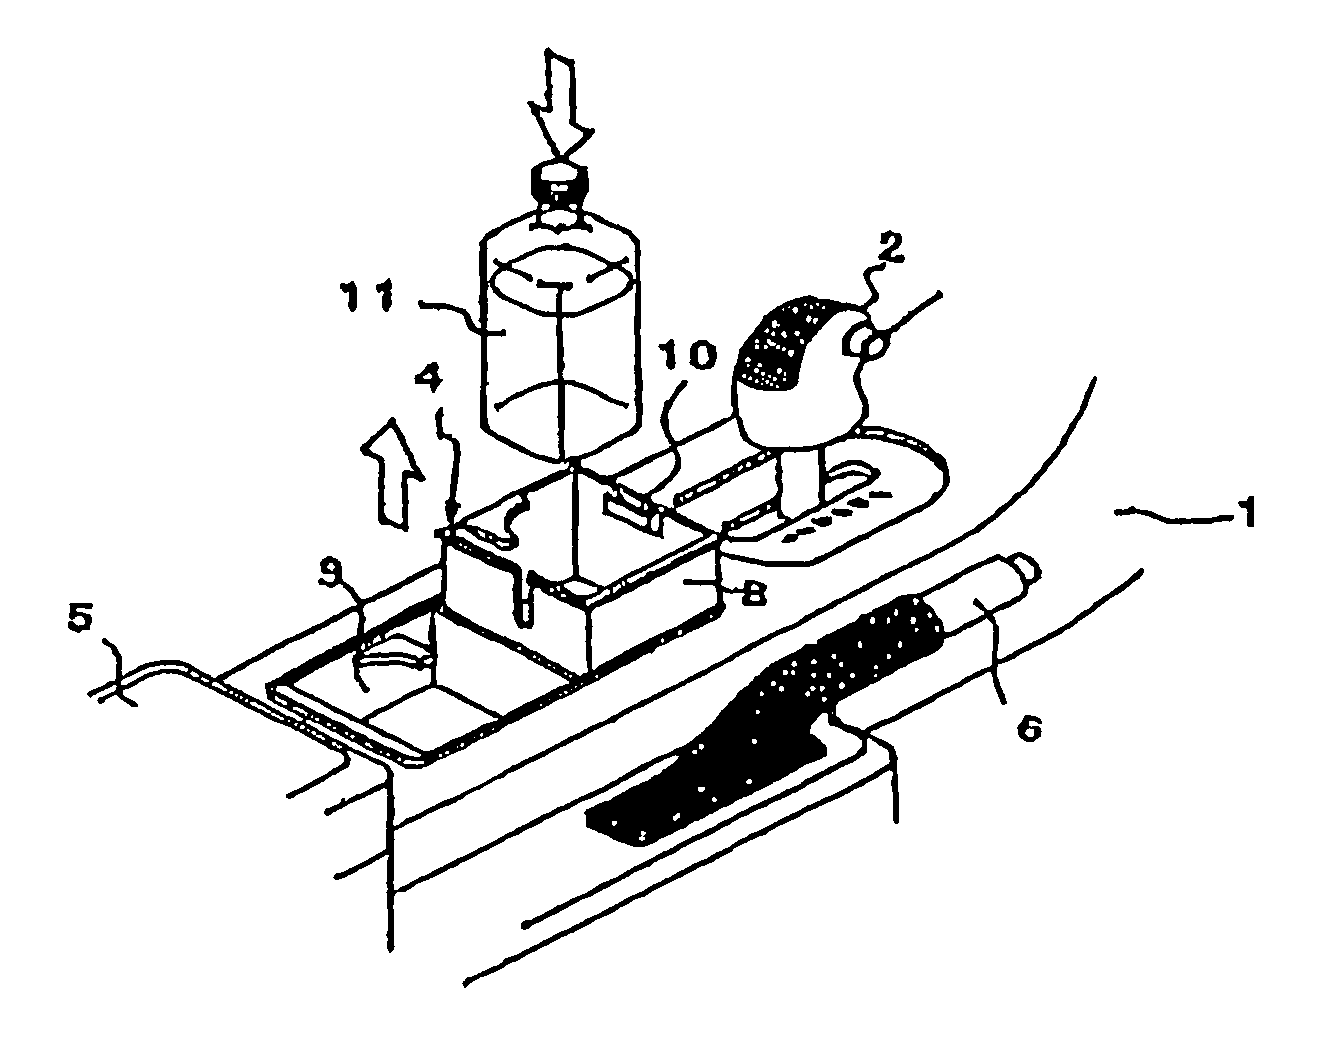 Configuration for operating interior device and cup holder using the same